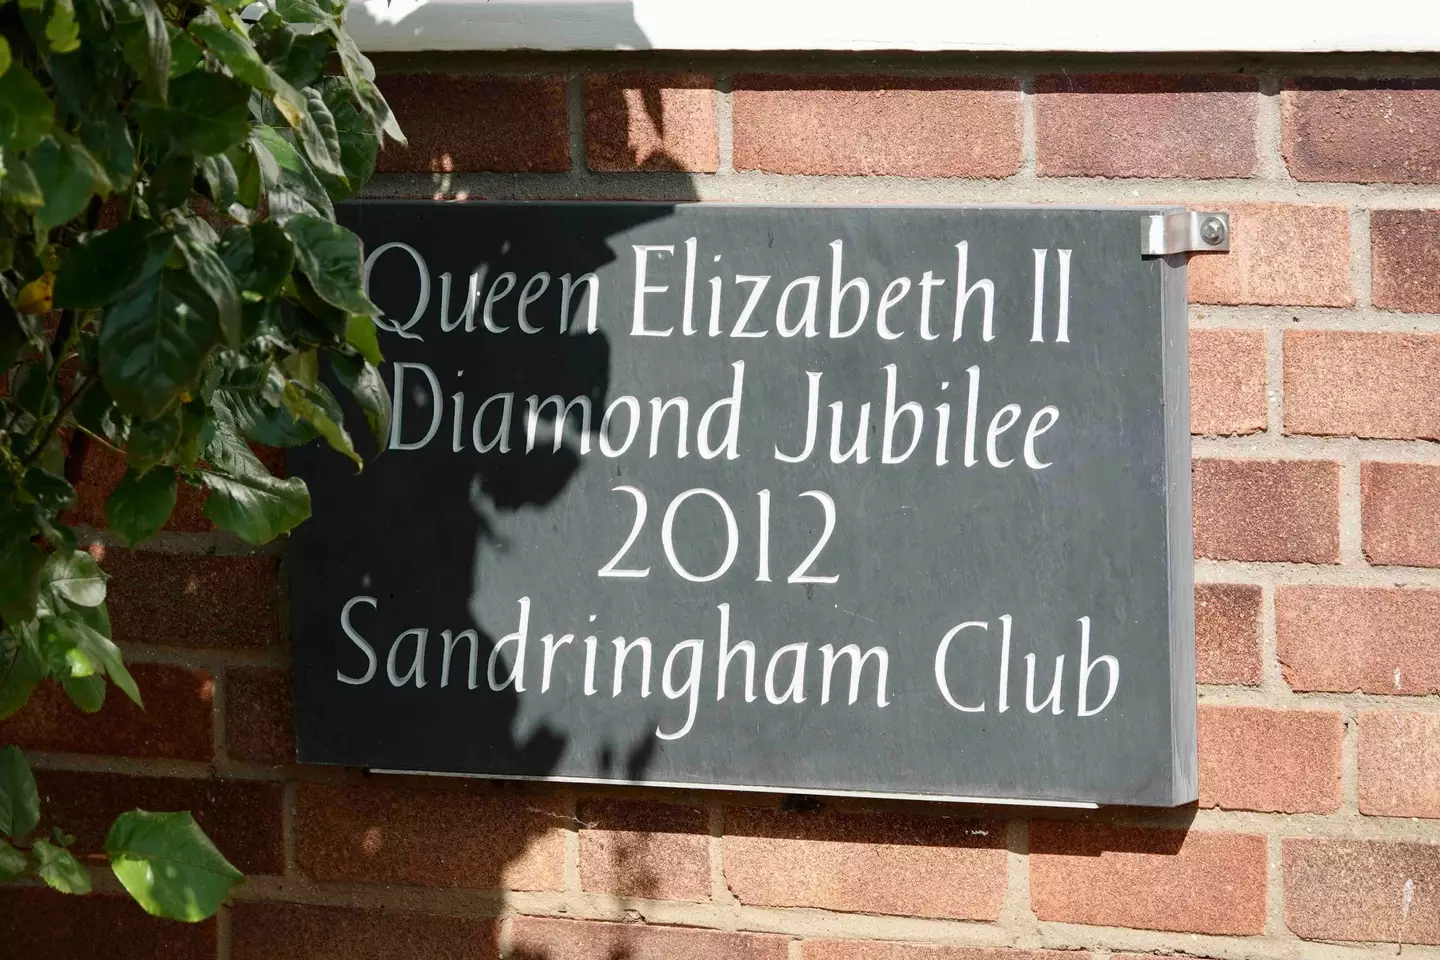 It's less than a mile from the Queen's Sandringham home.